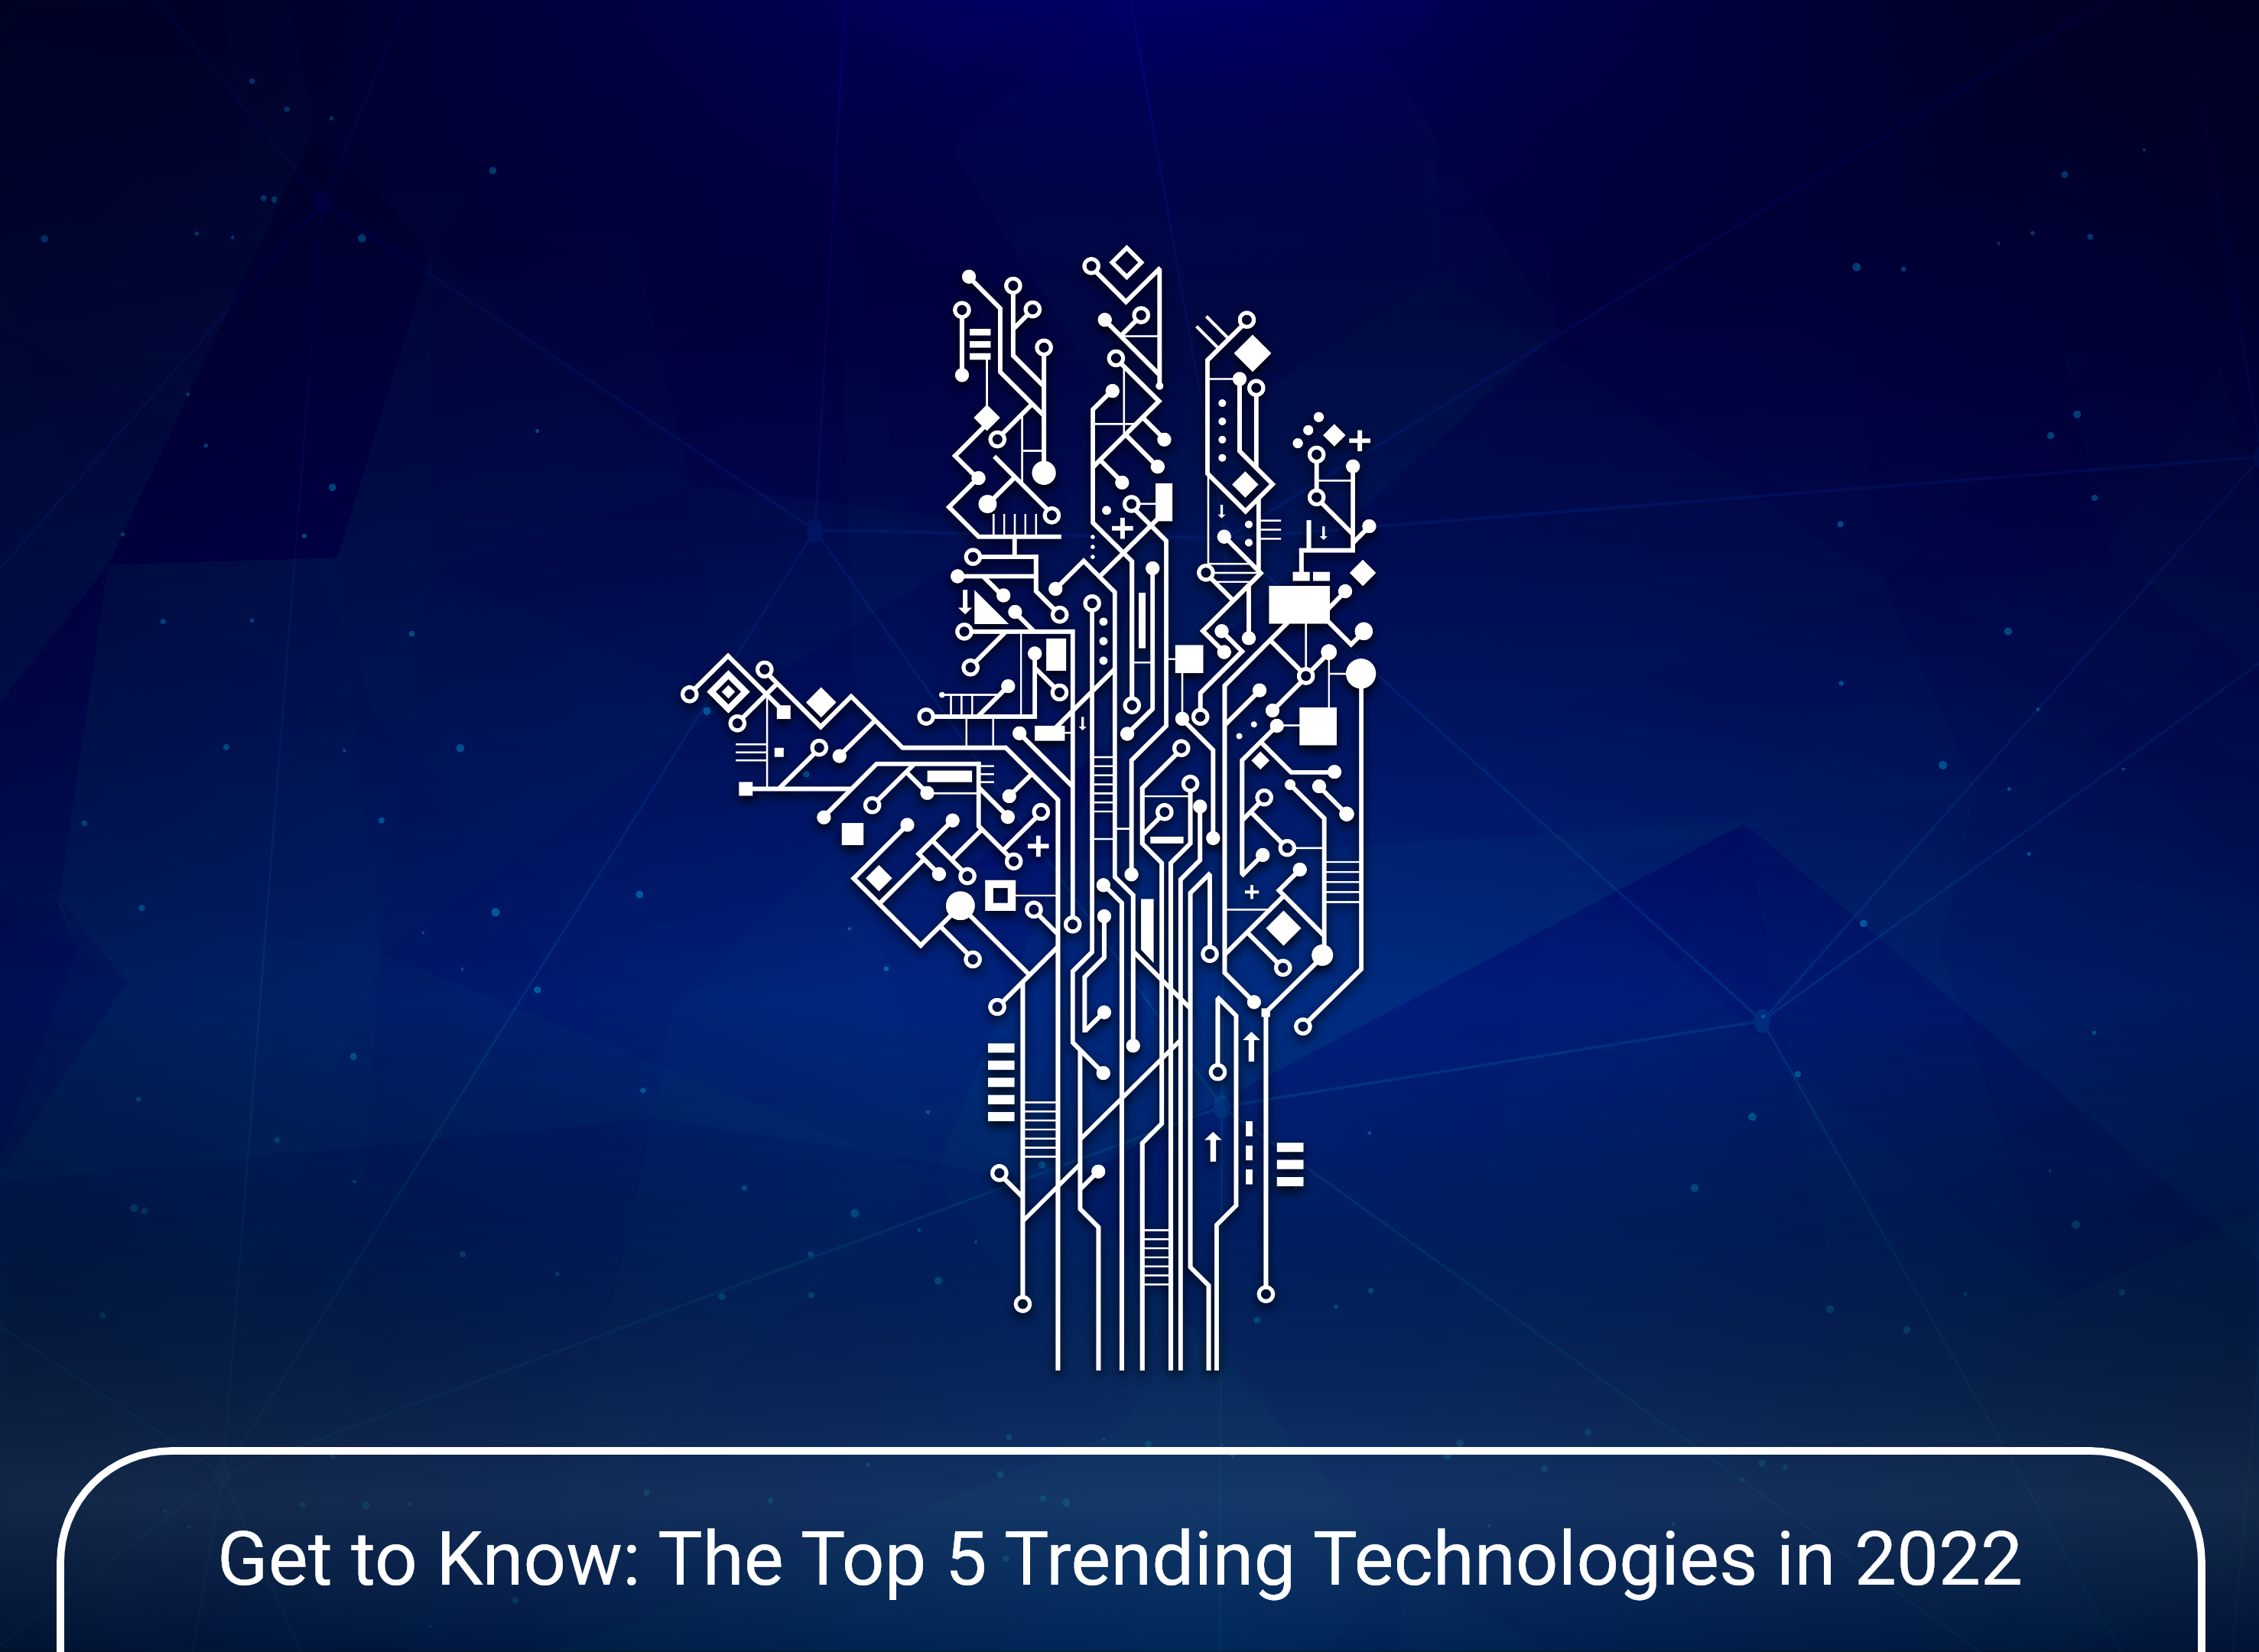 Get to Know: The Top 5 Trending Technologies in 2022 